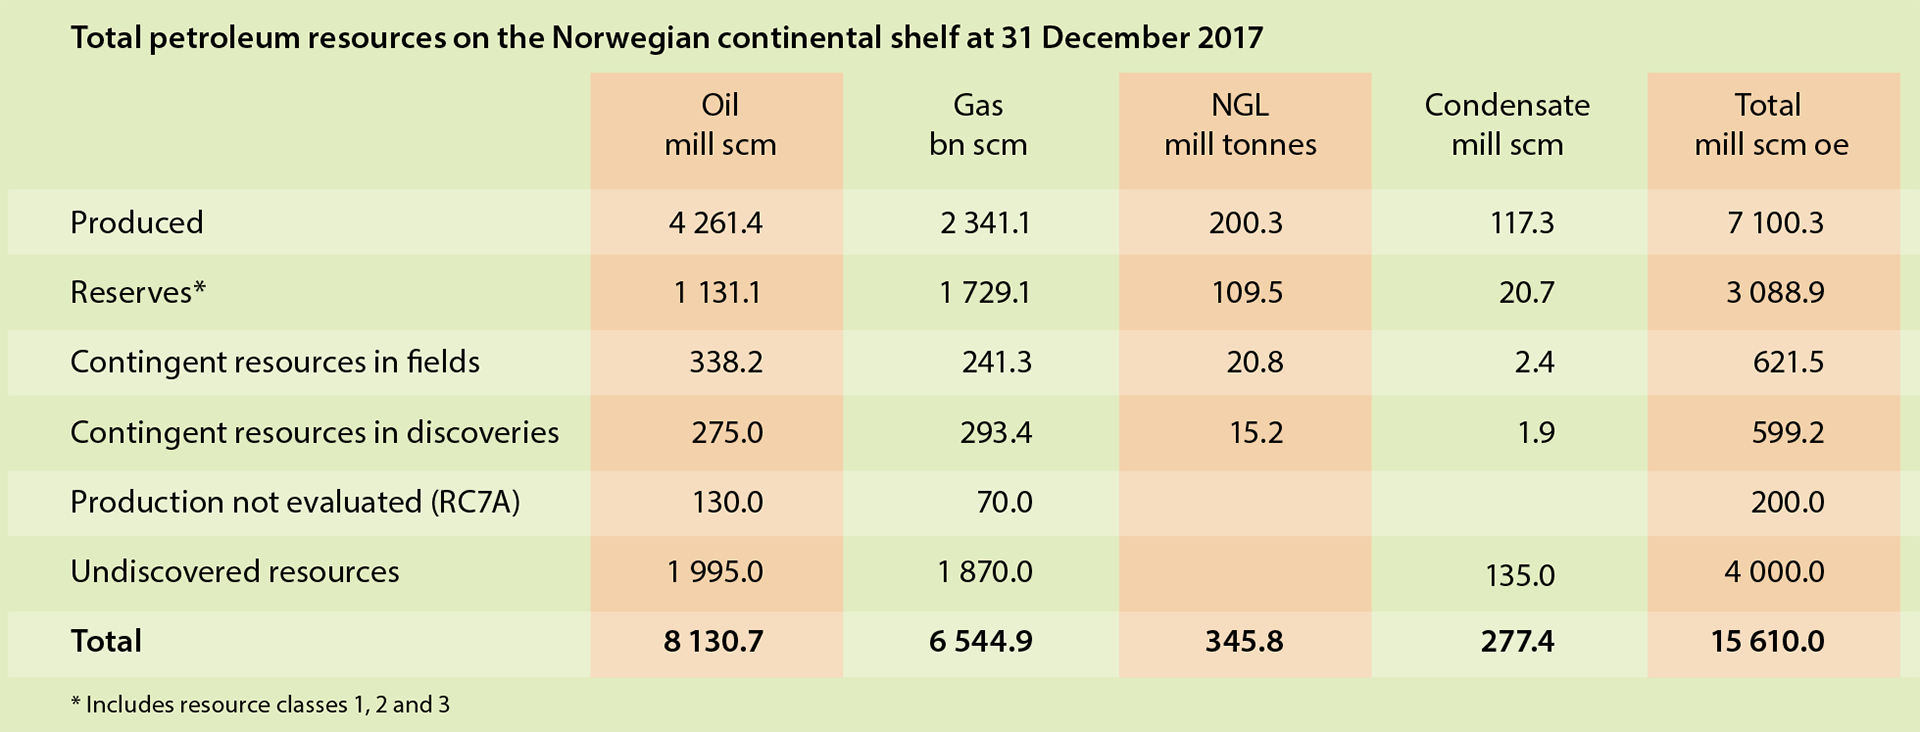 Table 1.1 Total petroleum resources on the NCS at 31 December 2017.